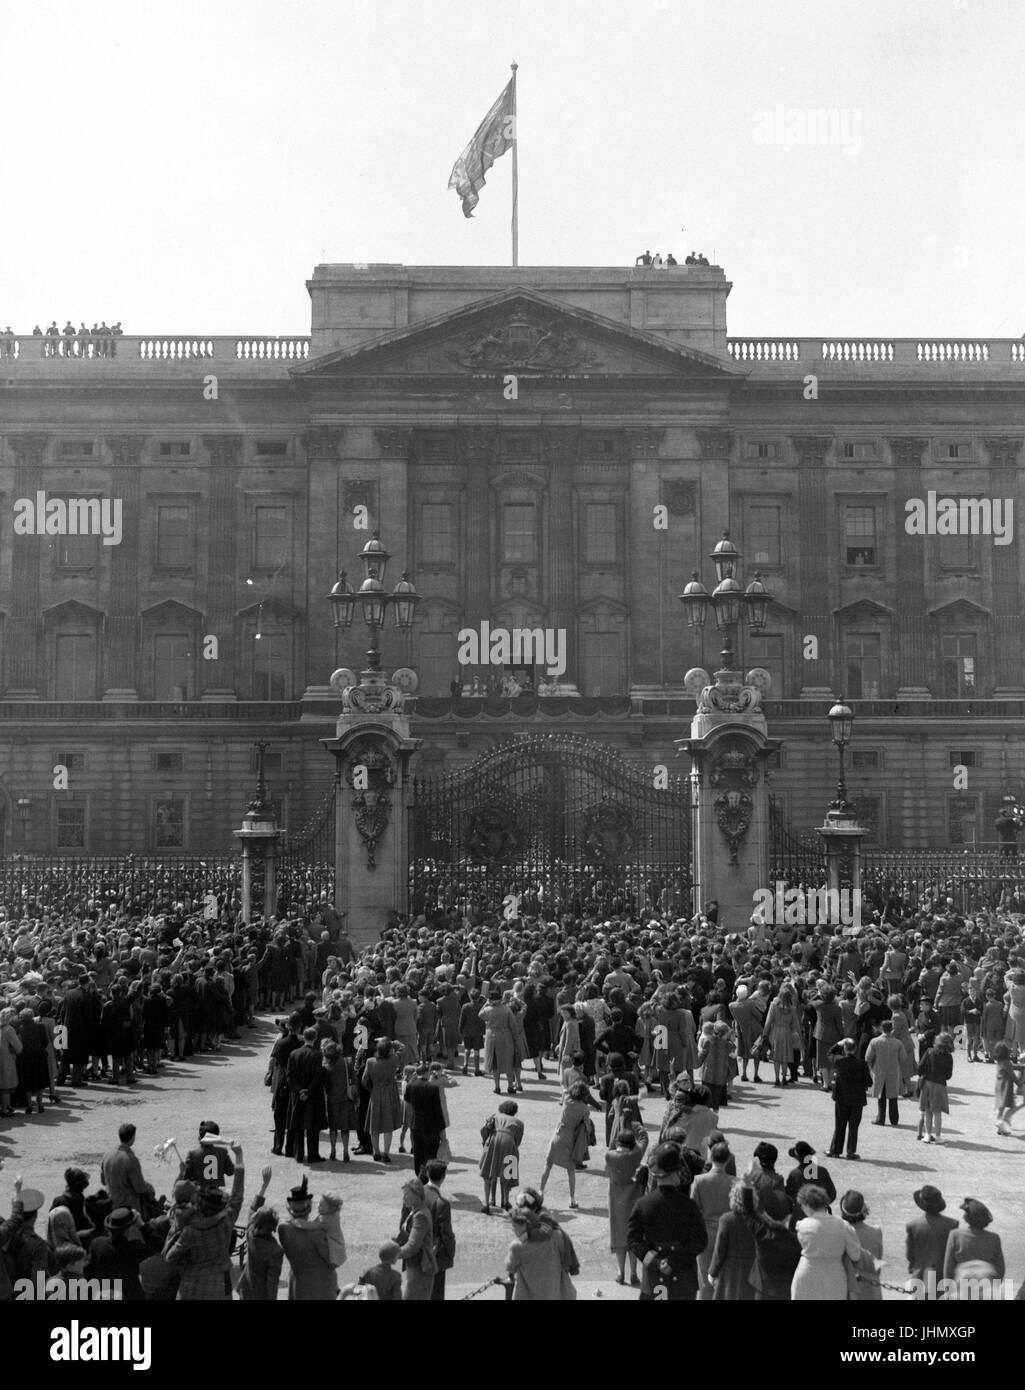 The crowded scene at the gates of Buckingham Palace as King George VI and Queen Elizabeth, with the Duke of Edinburgh, Princess Elizabeth, Duke and Duchess of Gloucester, Princess Margaret and Queen Mary. Stock Photo